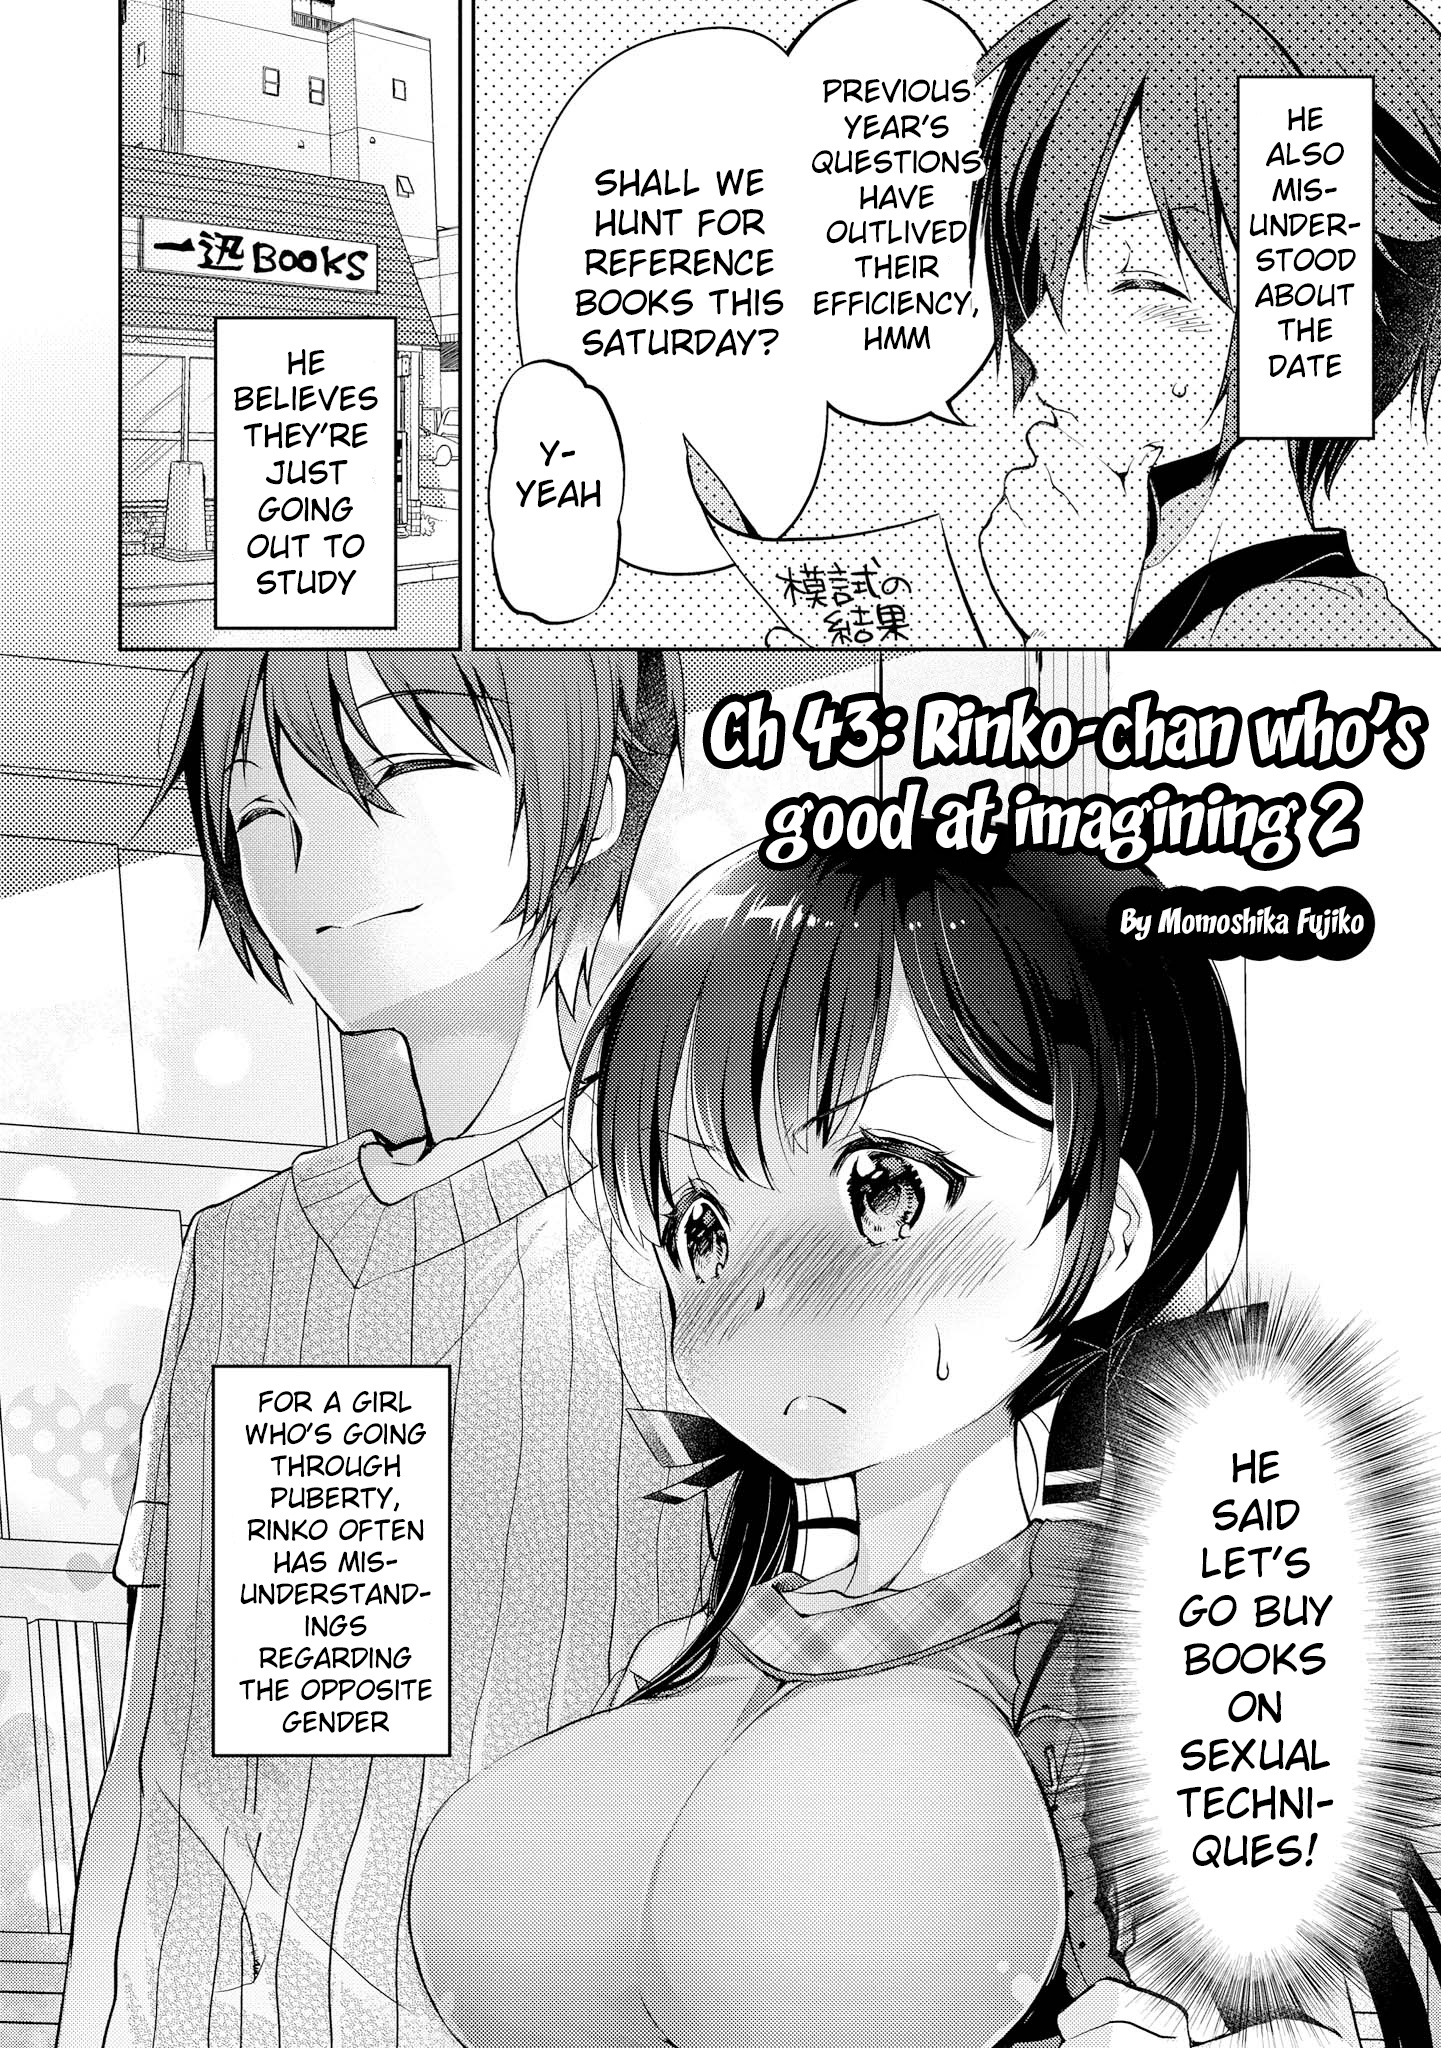 Do You Like Fluffy Boobs? Busty Girl Anthology Comic Vol.6 Chapter 43: Rinko-Chan Who's Good At Imagining 2 - Picture 3